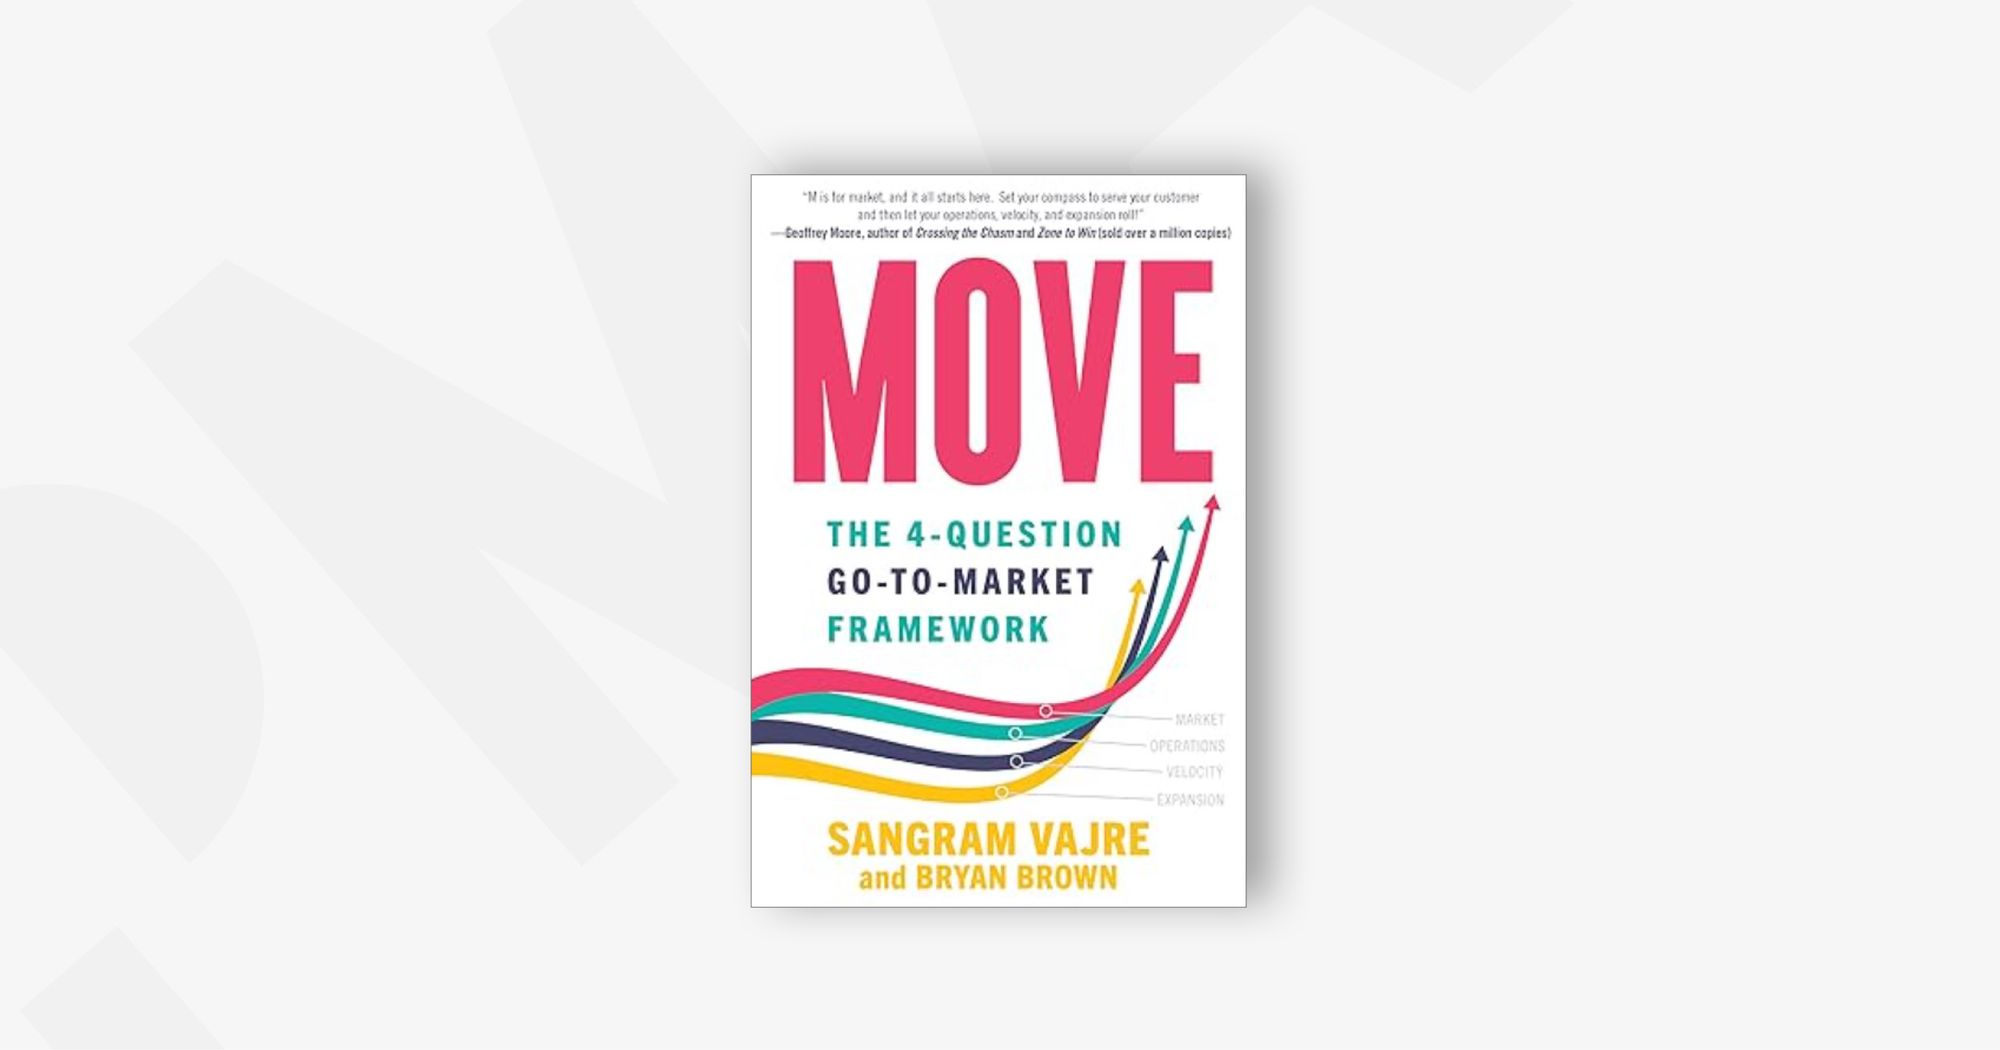 MOVE: The 4-question Go-to-Market Framework – Sanfram Vajre and Bryan Brown